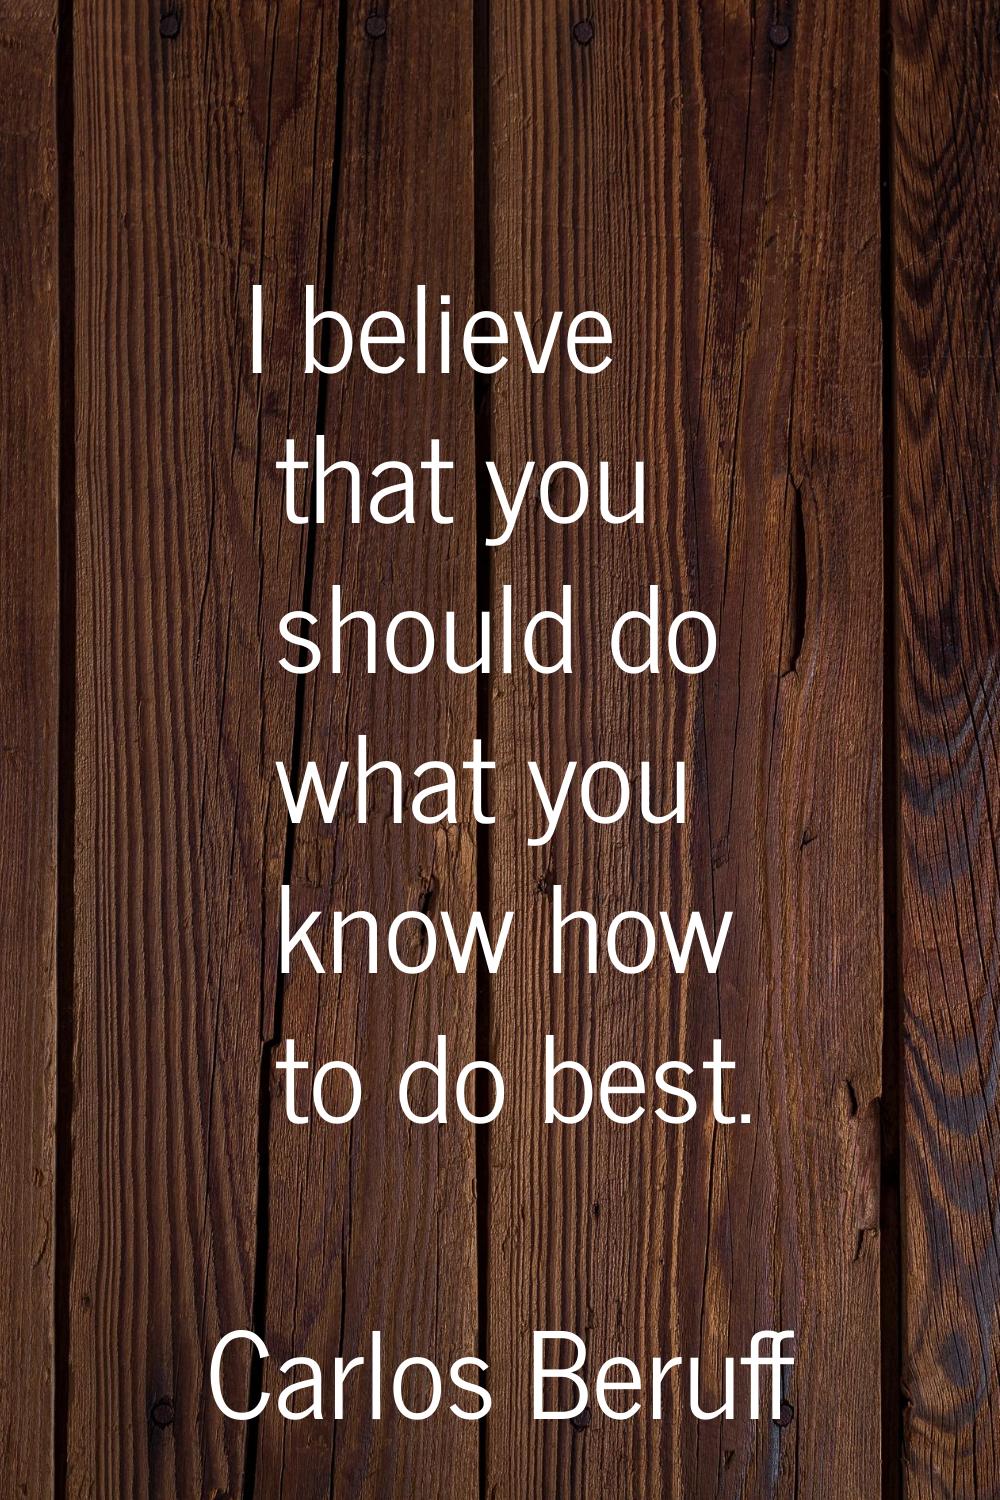 I believe that you should do what you know how to do best.